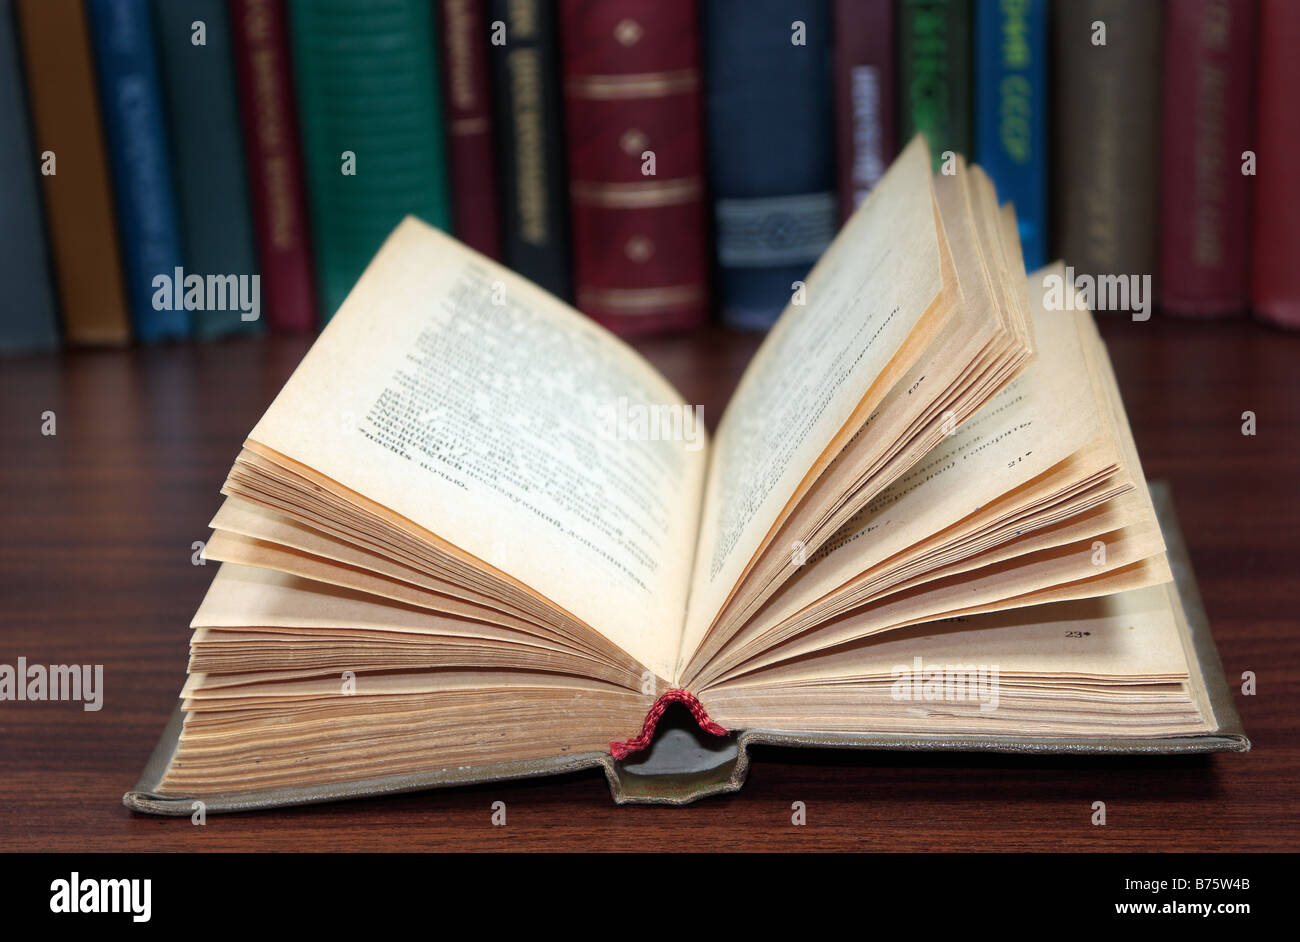 Old open book on the desk Stock Photo